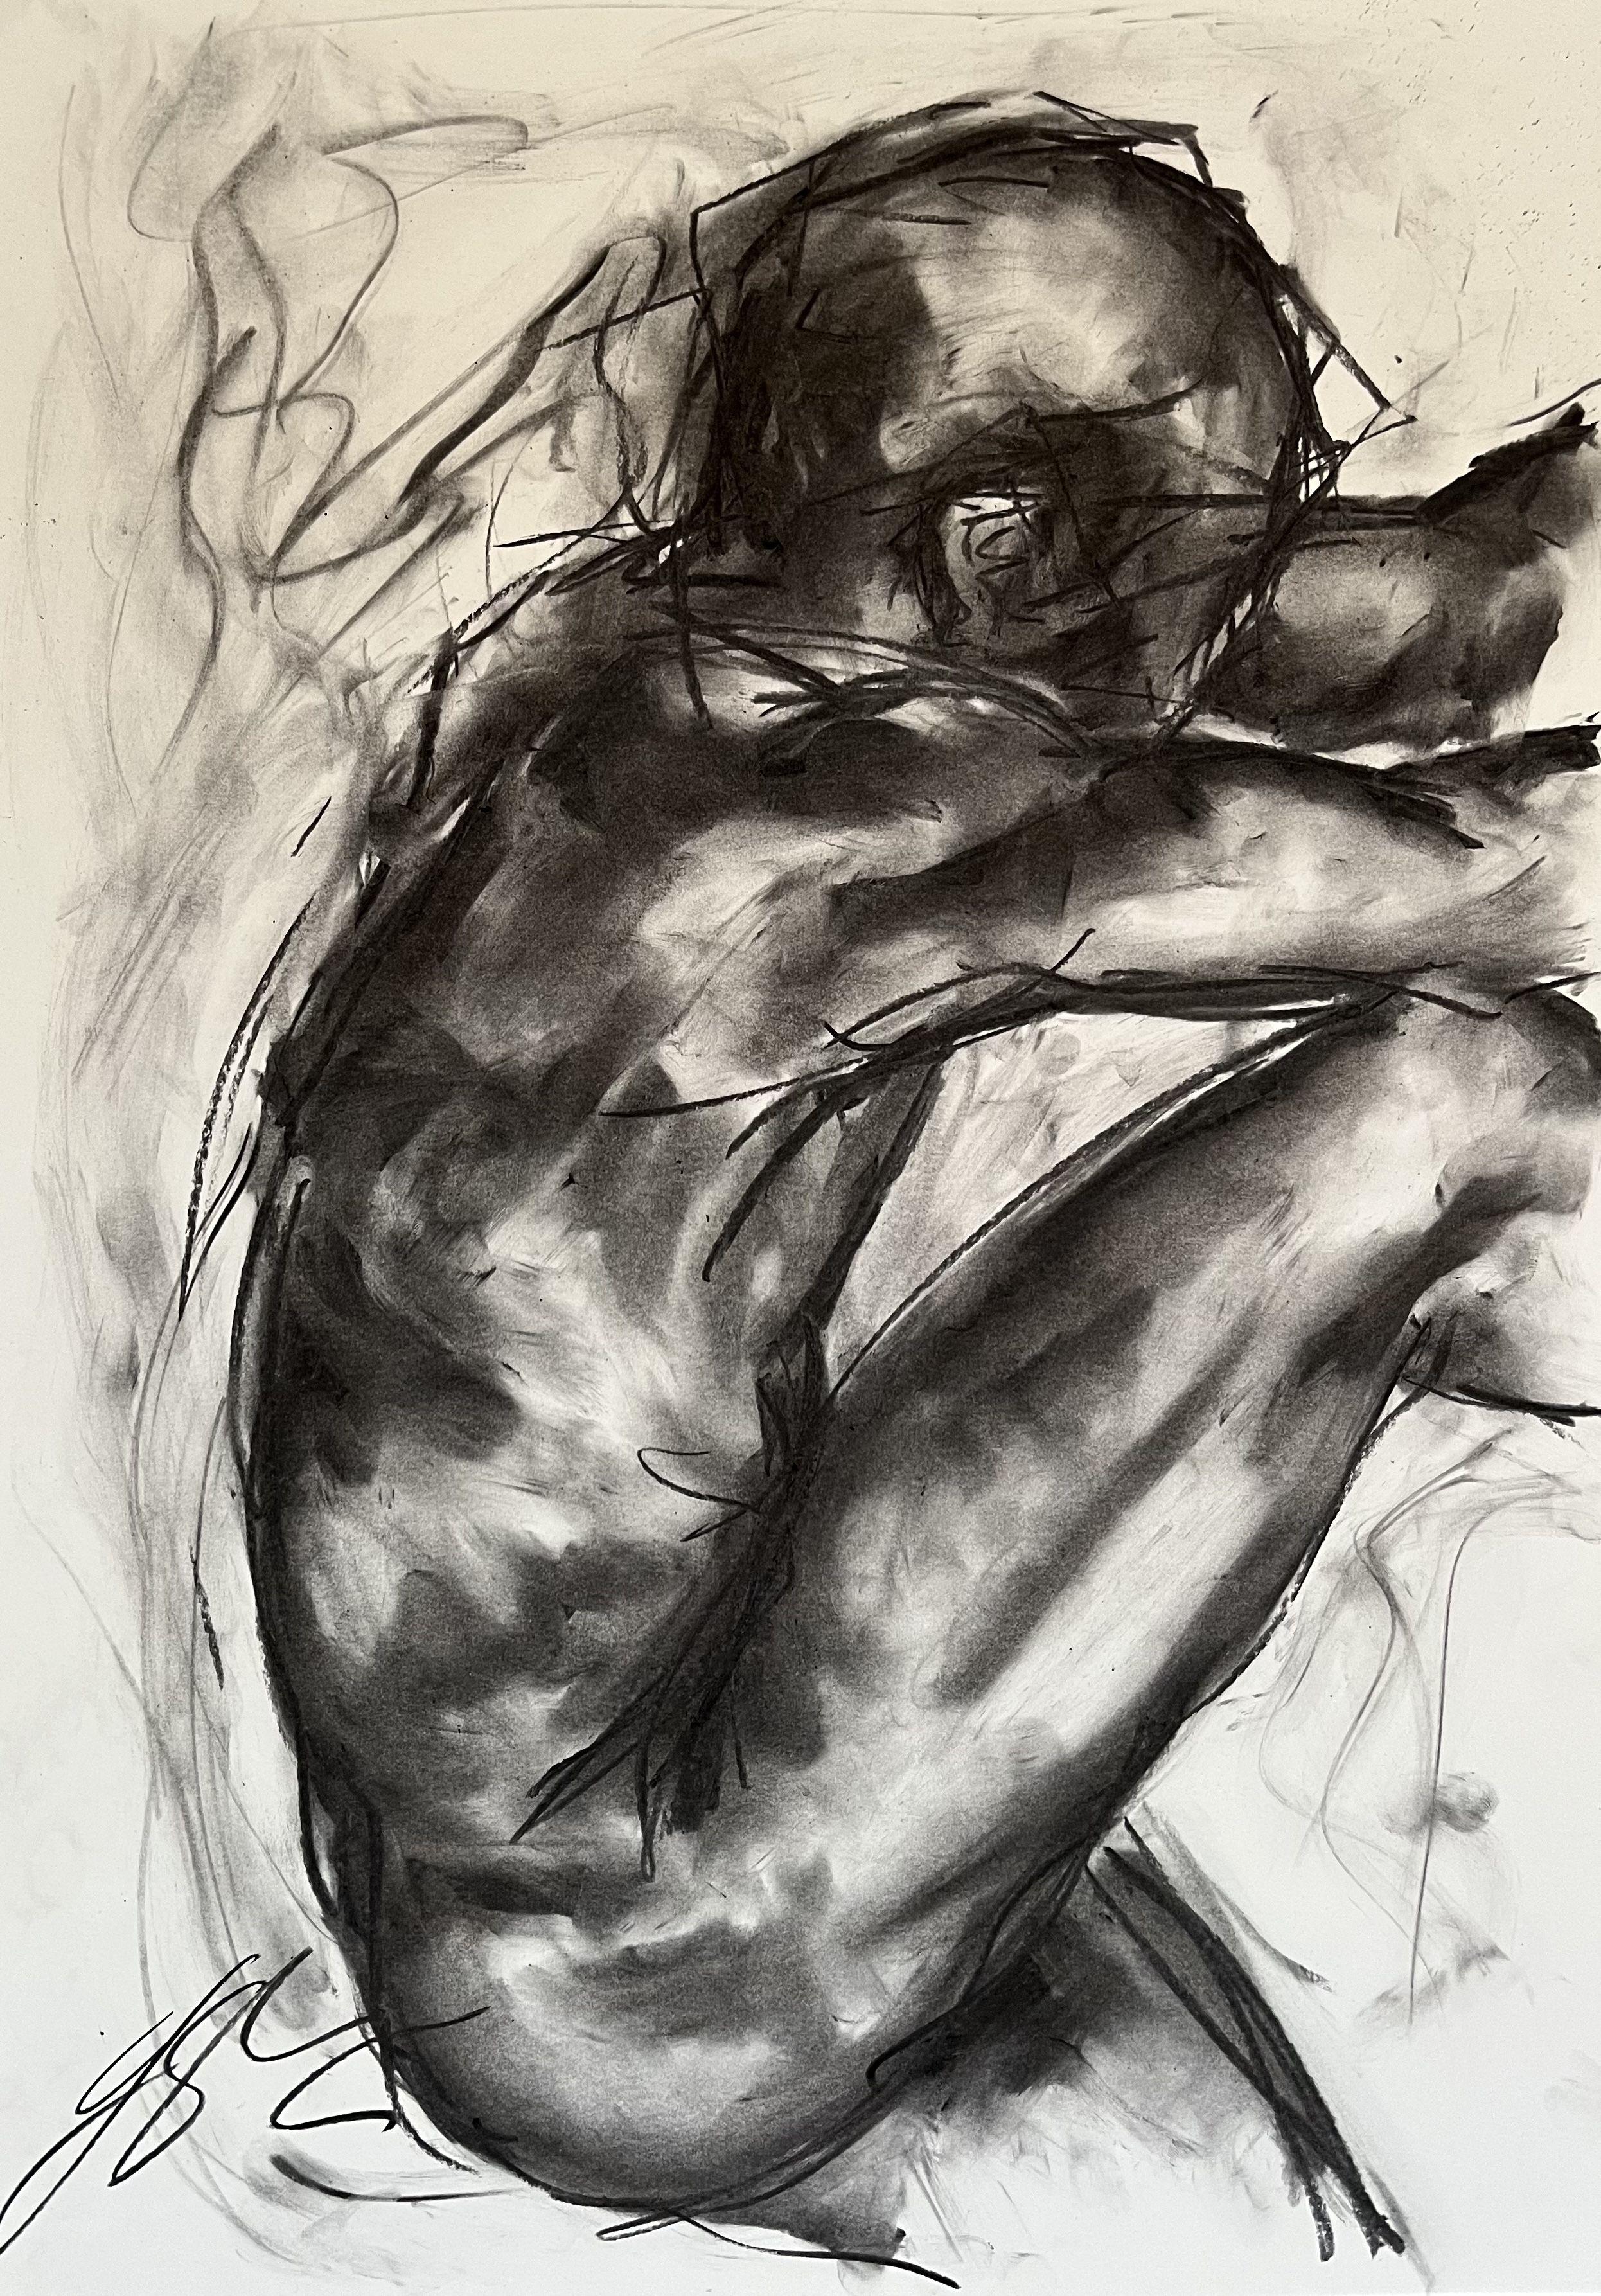 Our Best, Drawing, Charcoal on Paper - Art by James Shipton